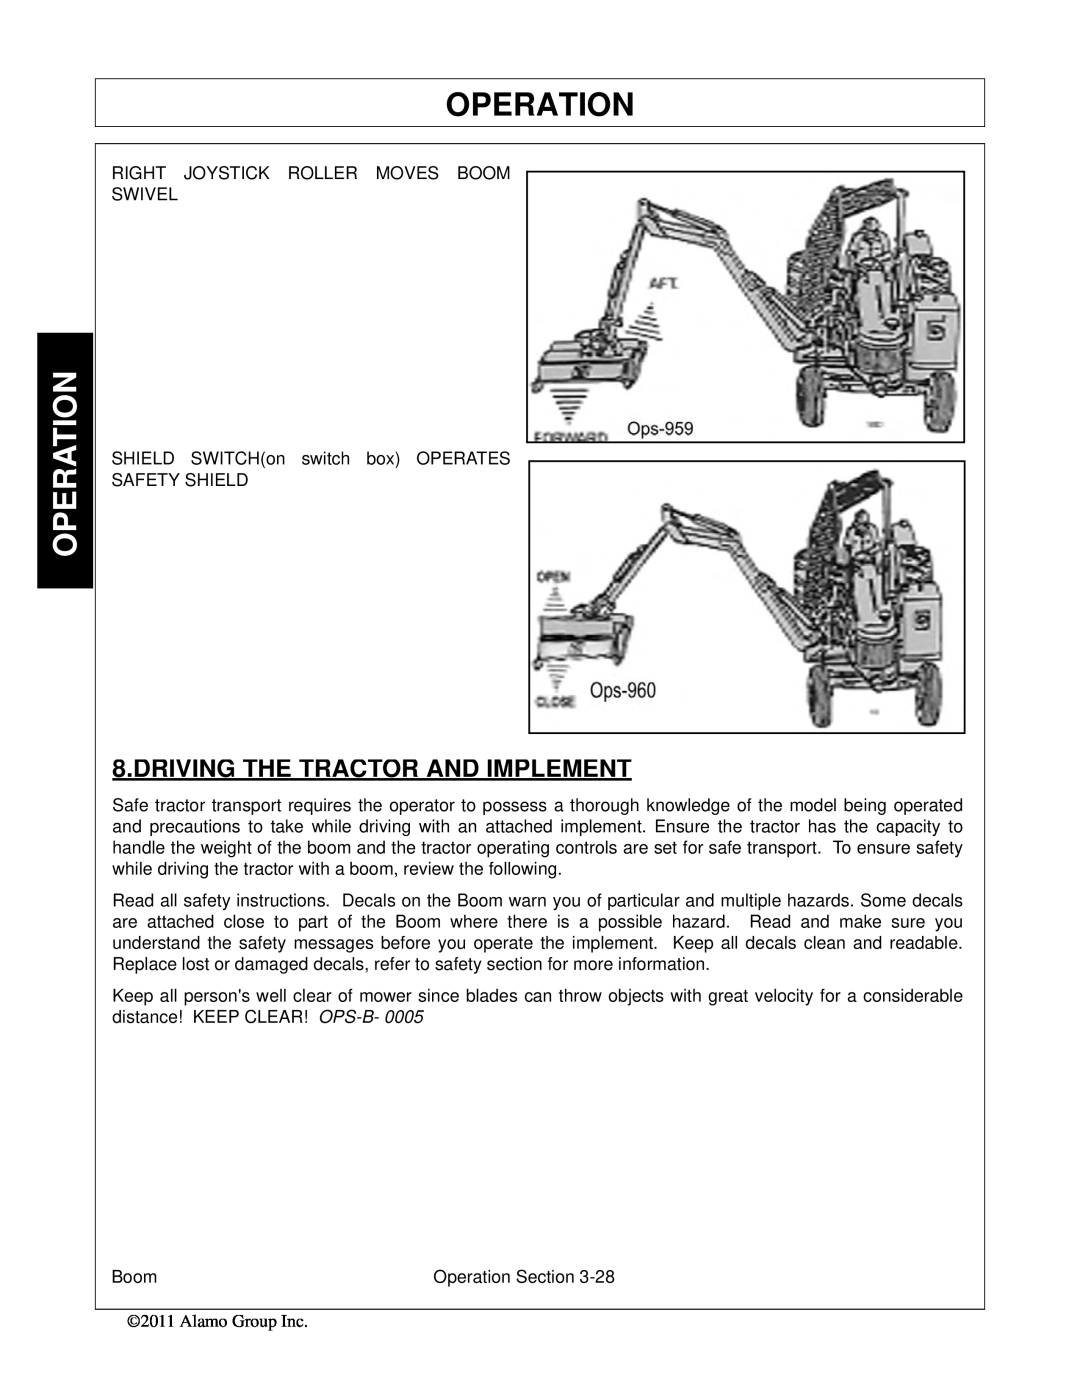 Tiger Products Co., Ltd 5101E, 5083E, 5093E manual Driving The Tractor And Implement, Operation 